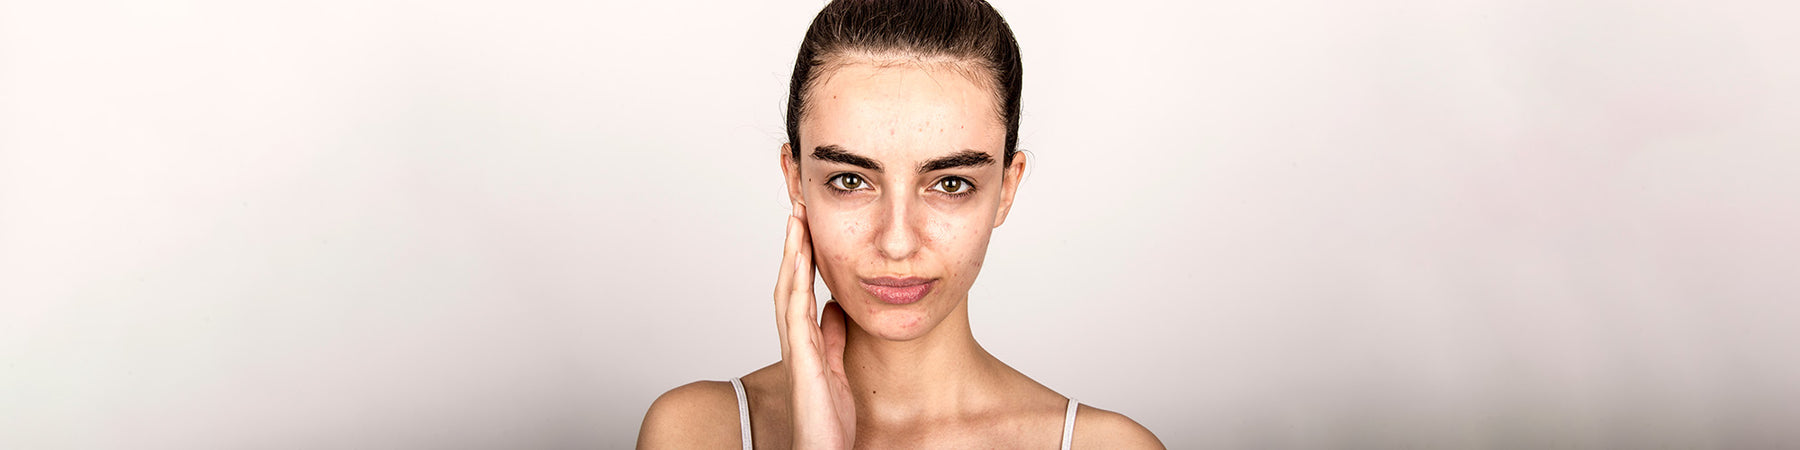 What is the Right Way to Treat Acne?